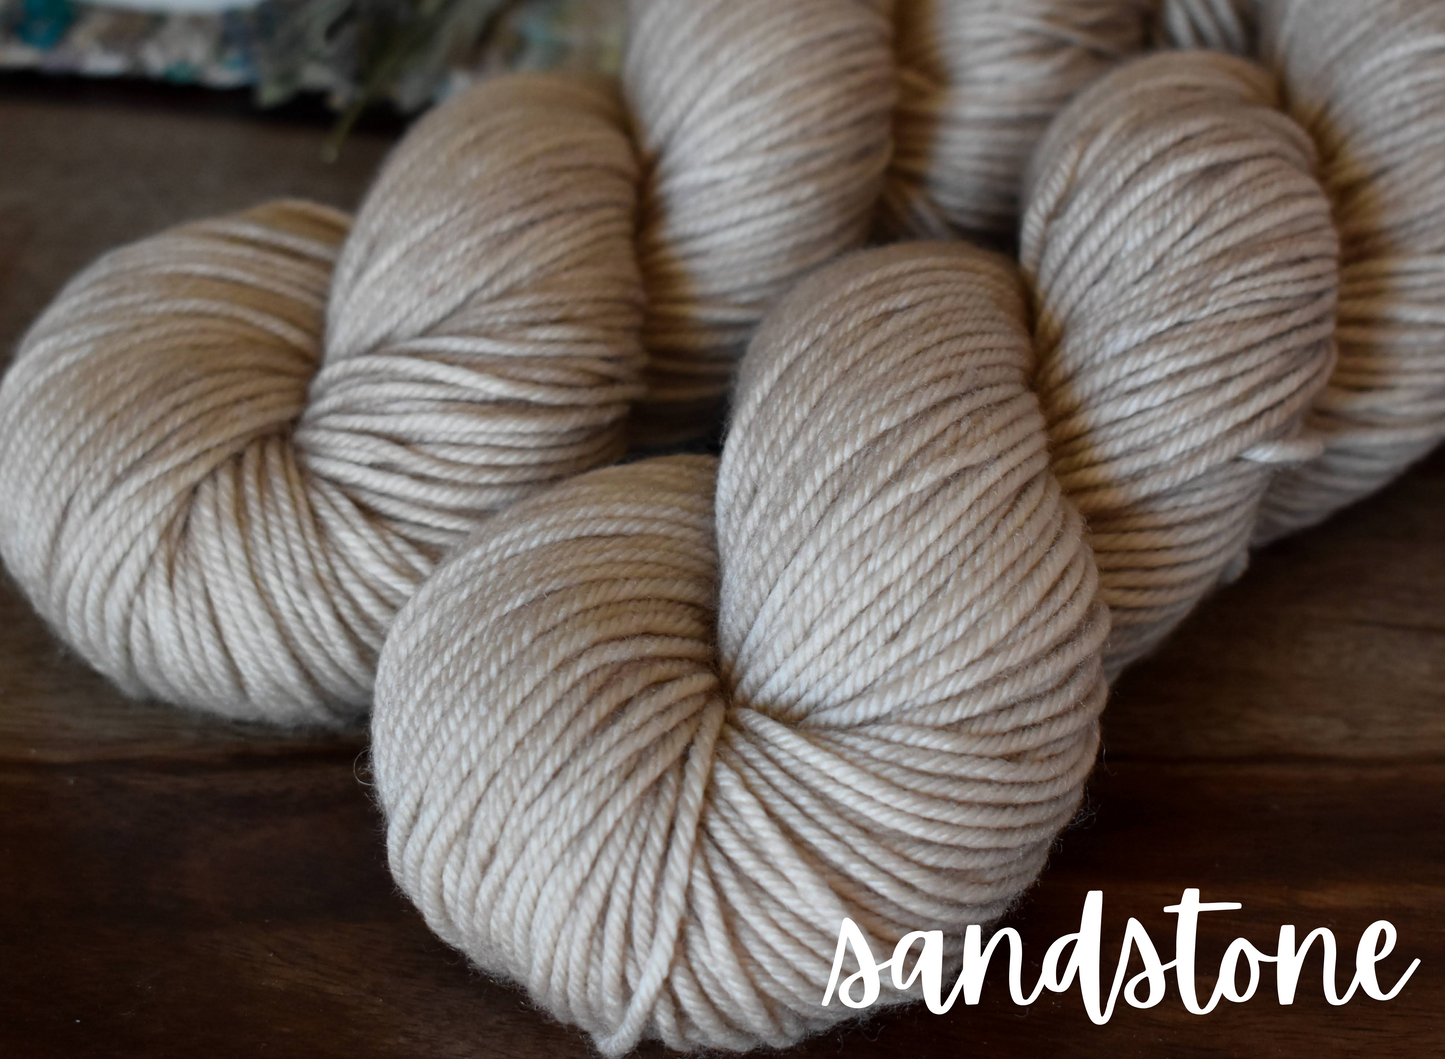 Sandstone - Dyed-To-Order